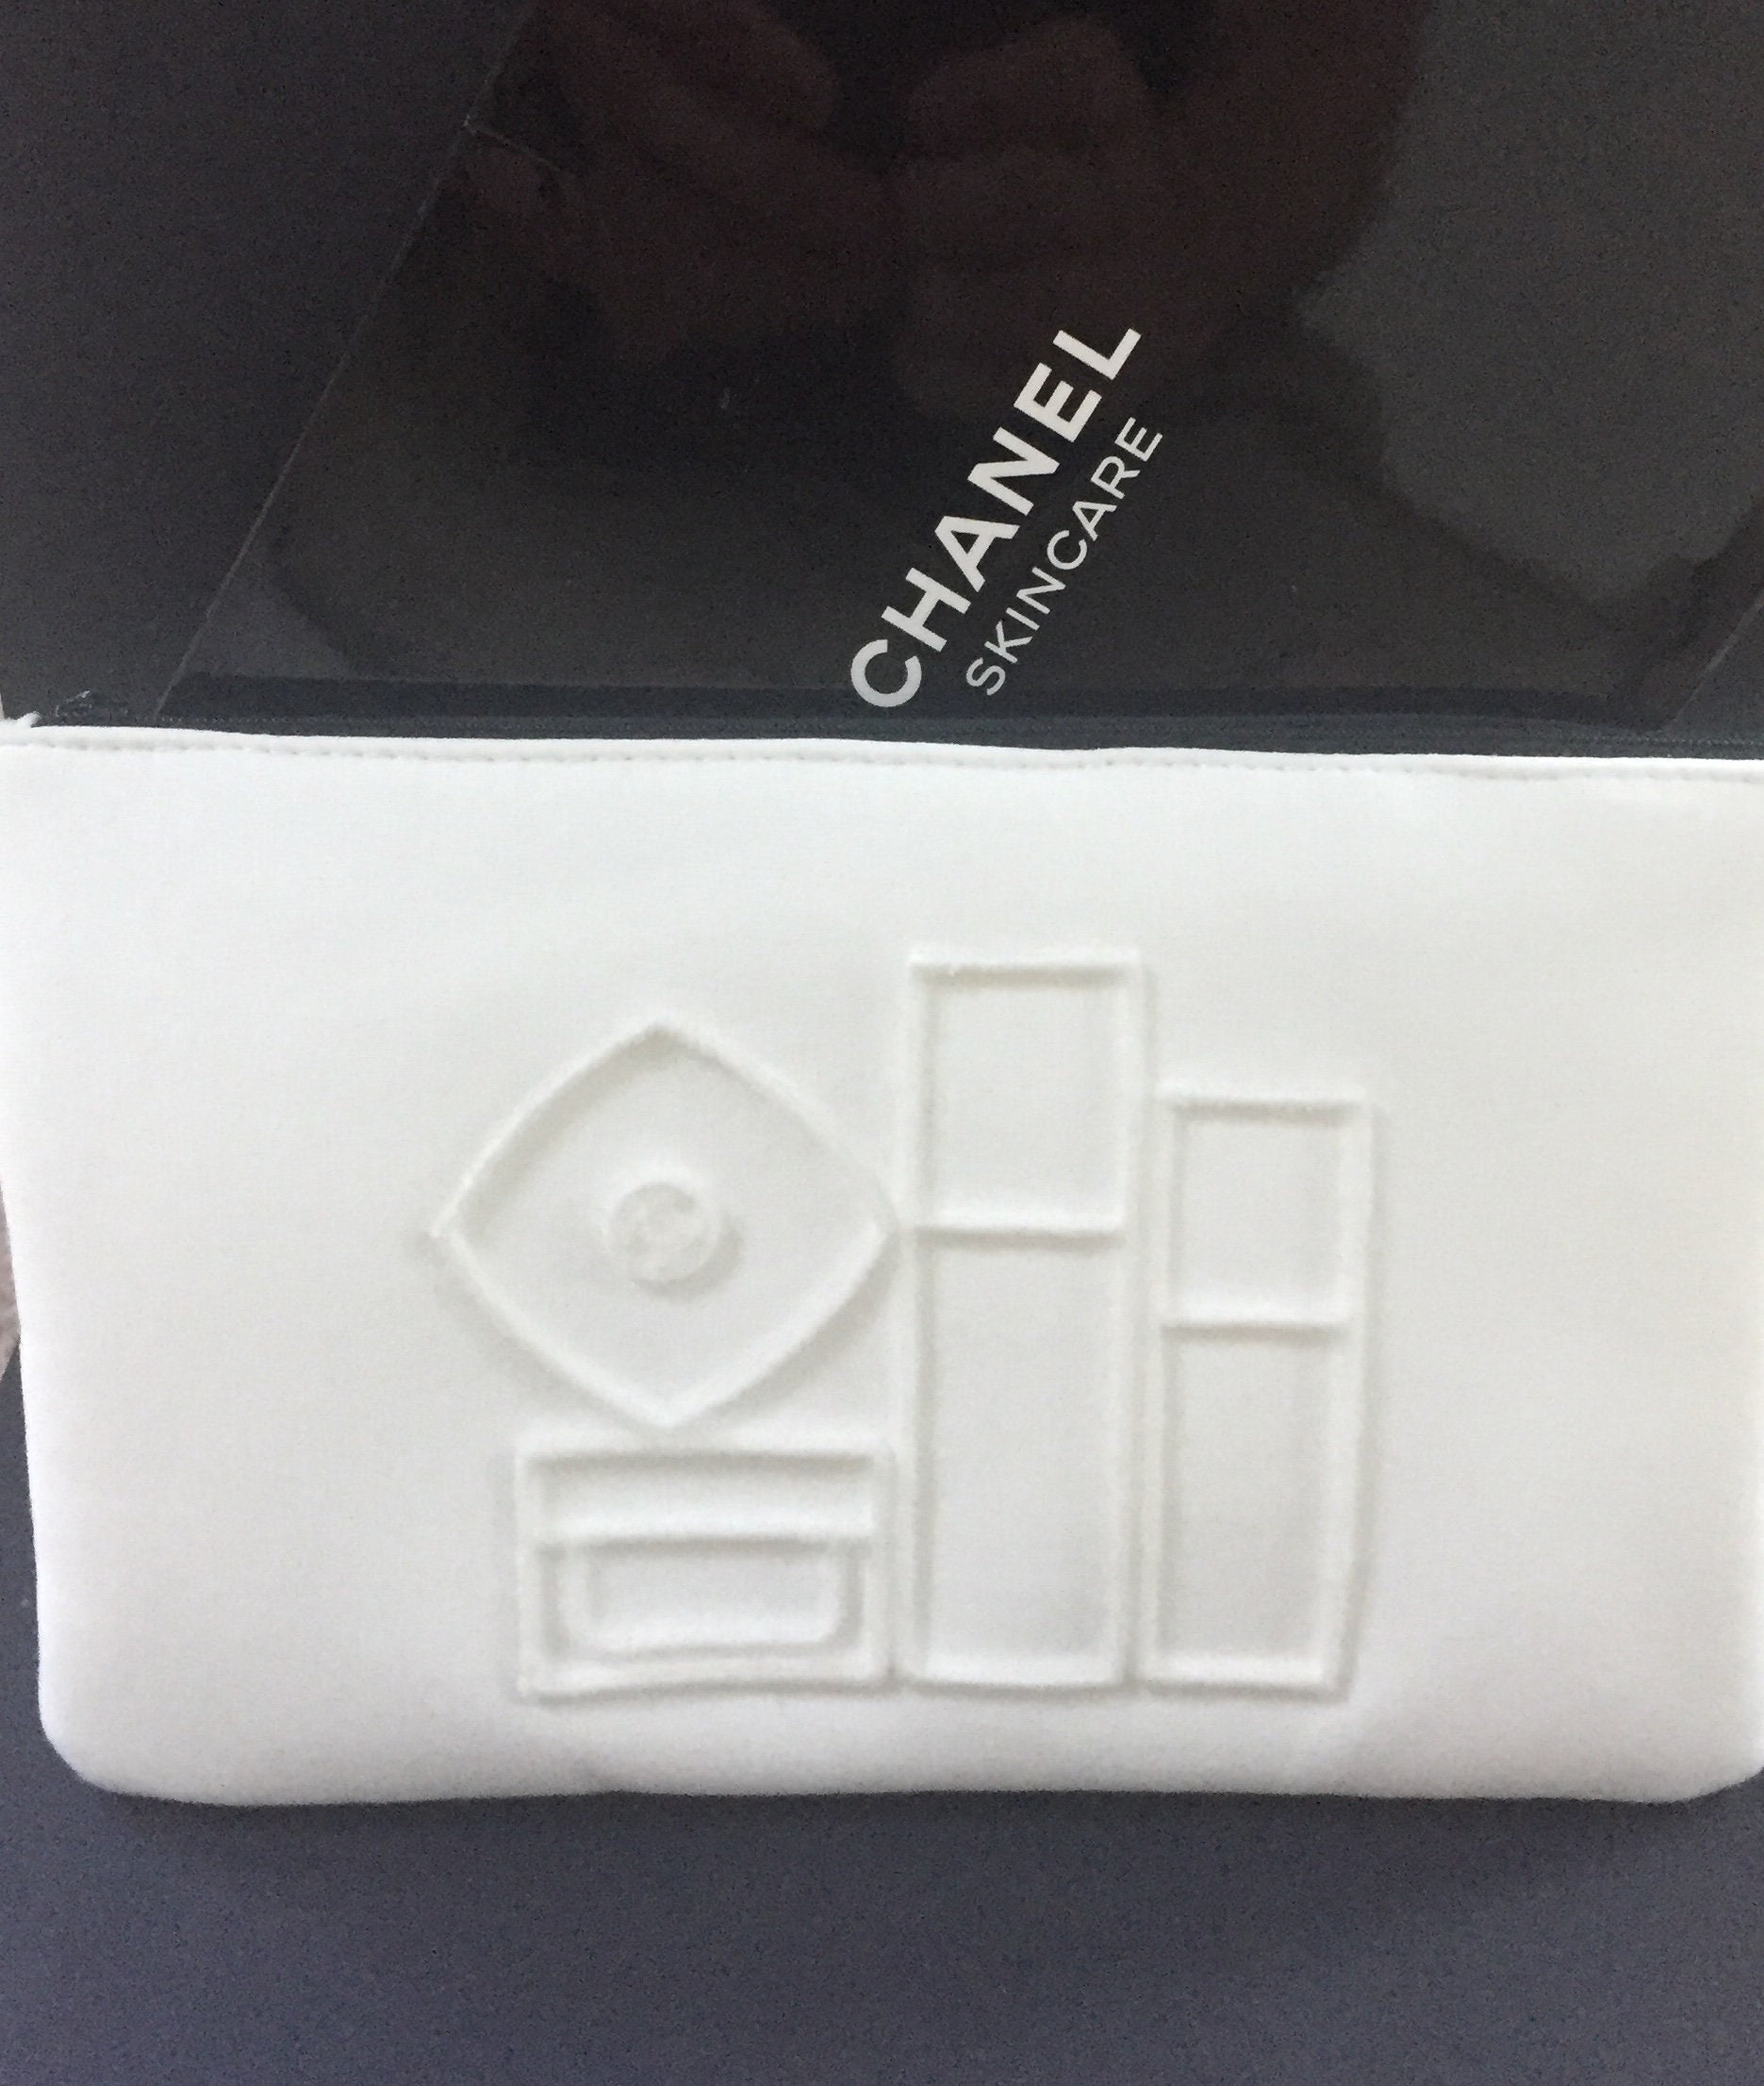 Authentic White Chanel Makeup Bag VIP Gift From France. 